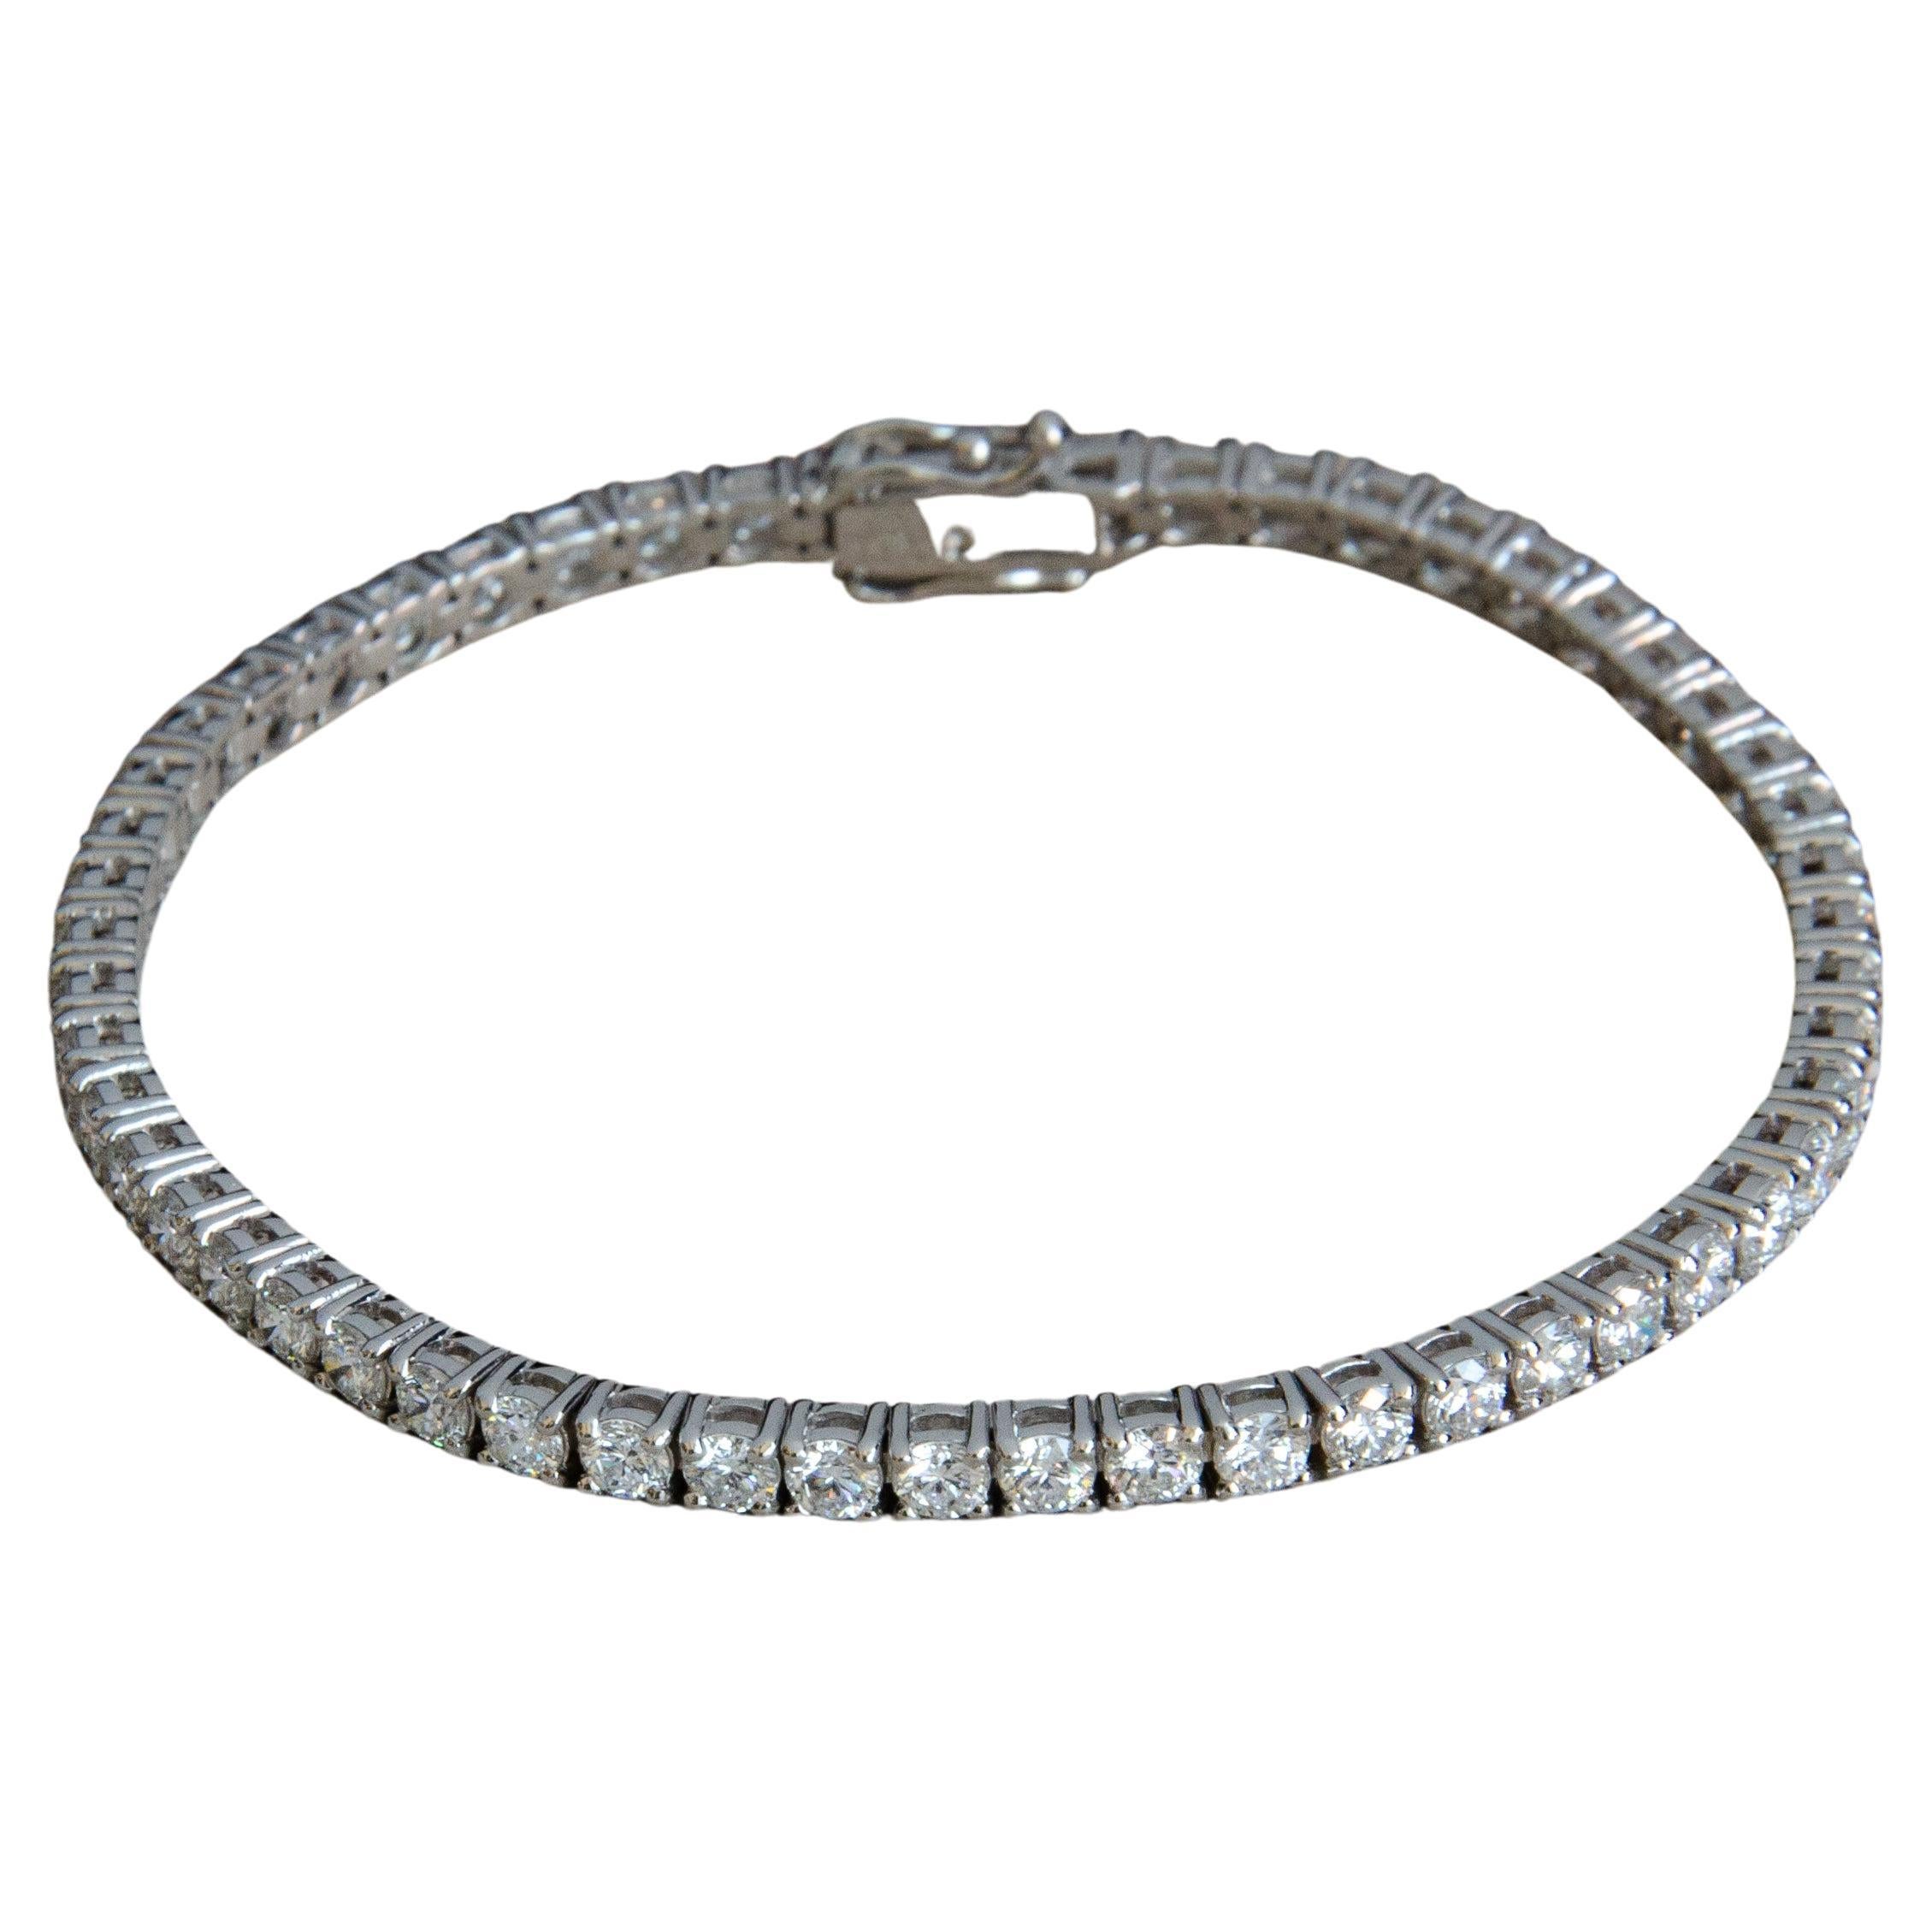 Ruth Nyc, 5.00ctw Tennis Bracelet in 14k White Gold For Sale